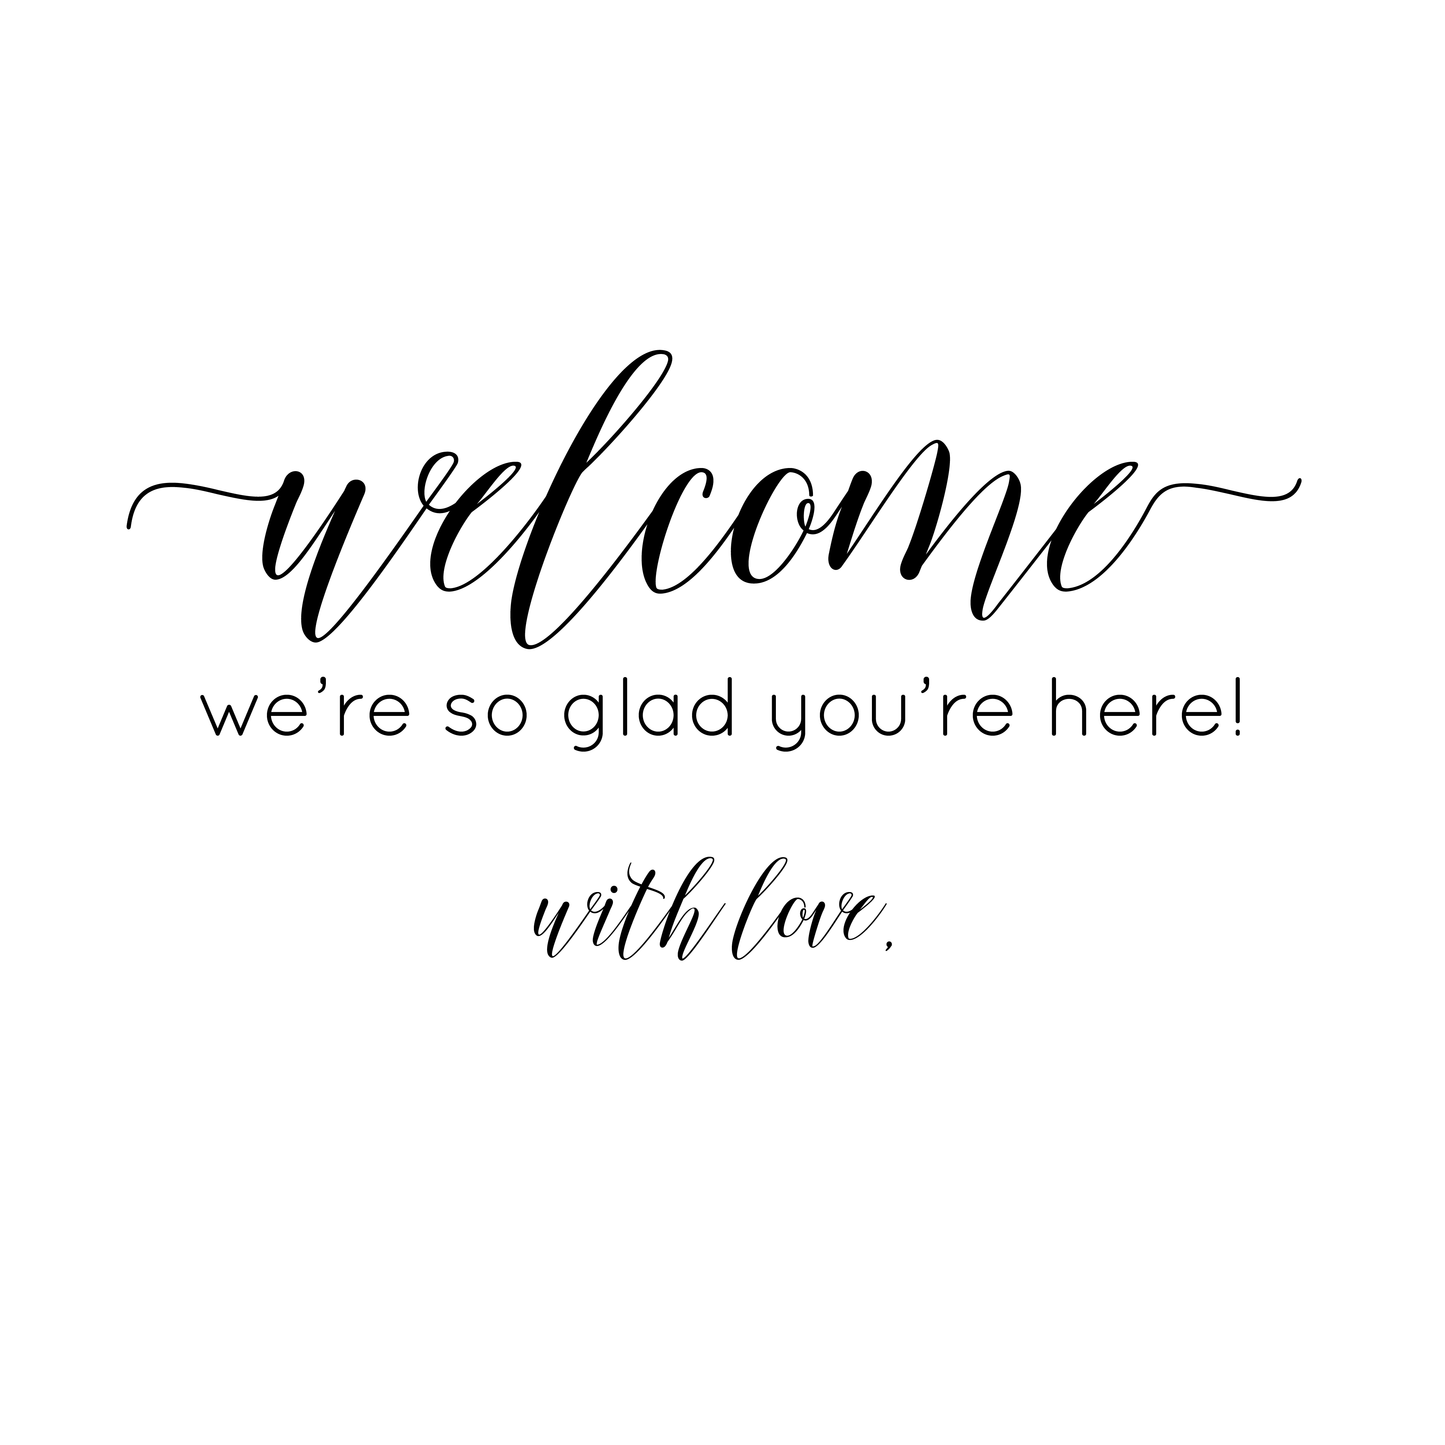 Welcome Water Bottle Labels Lowercase Script Font